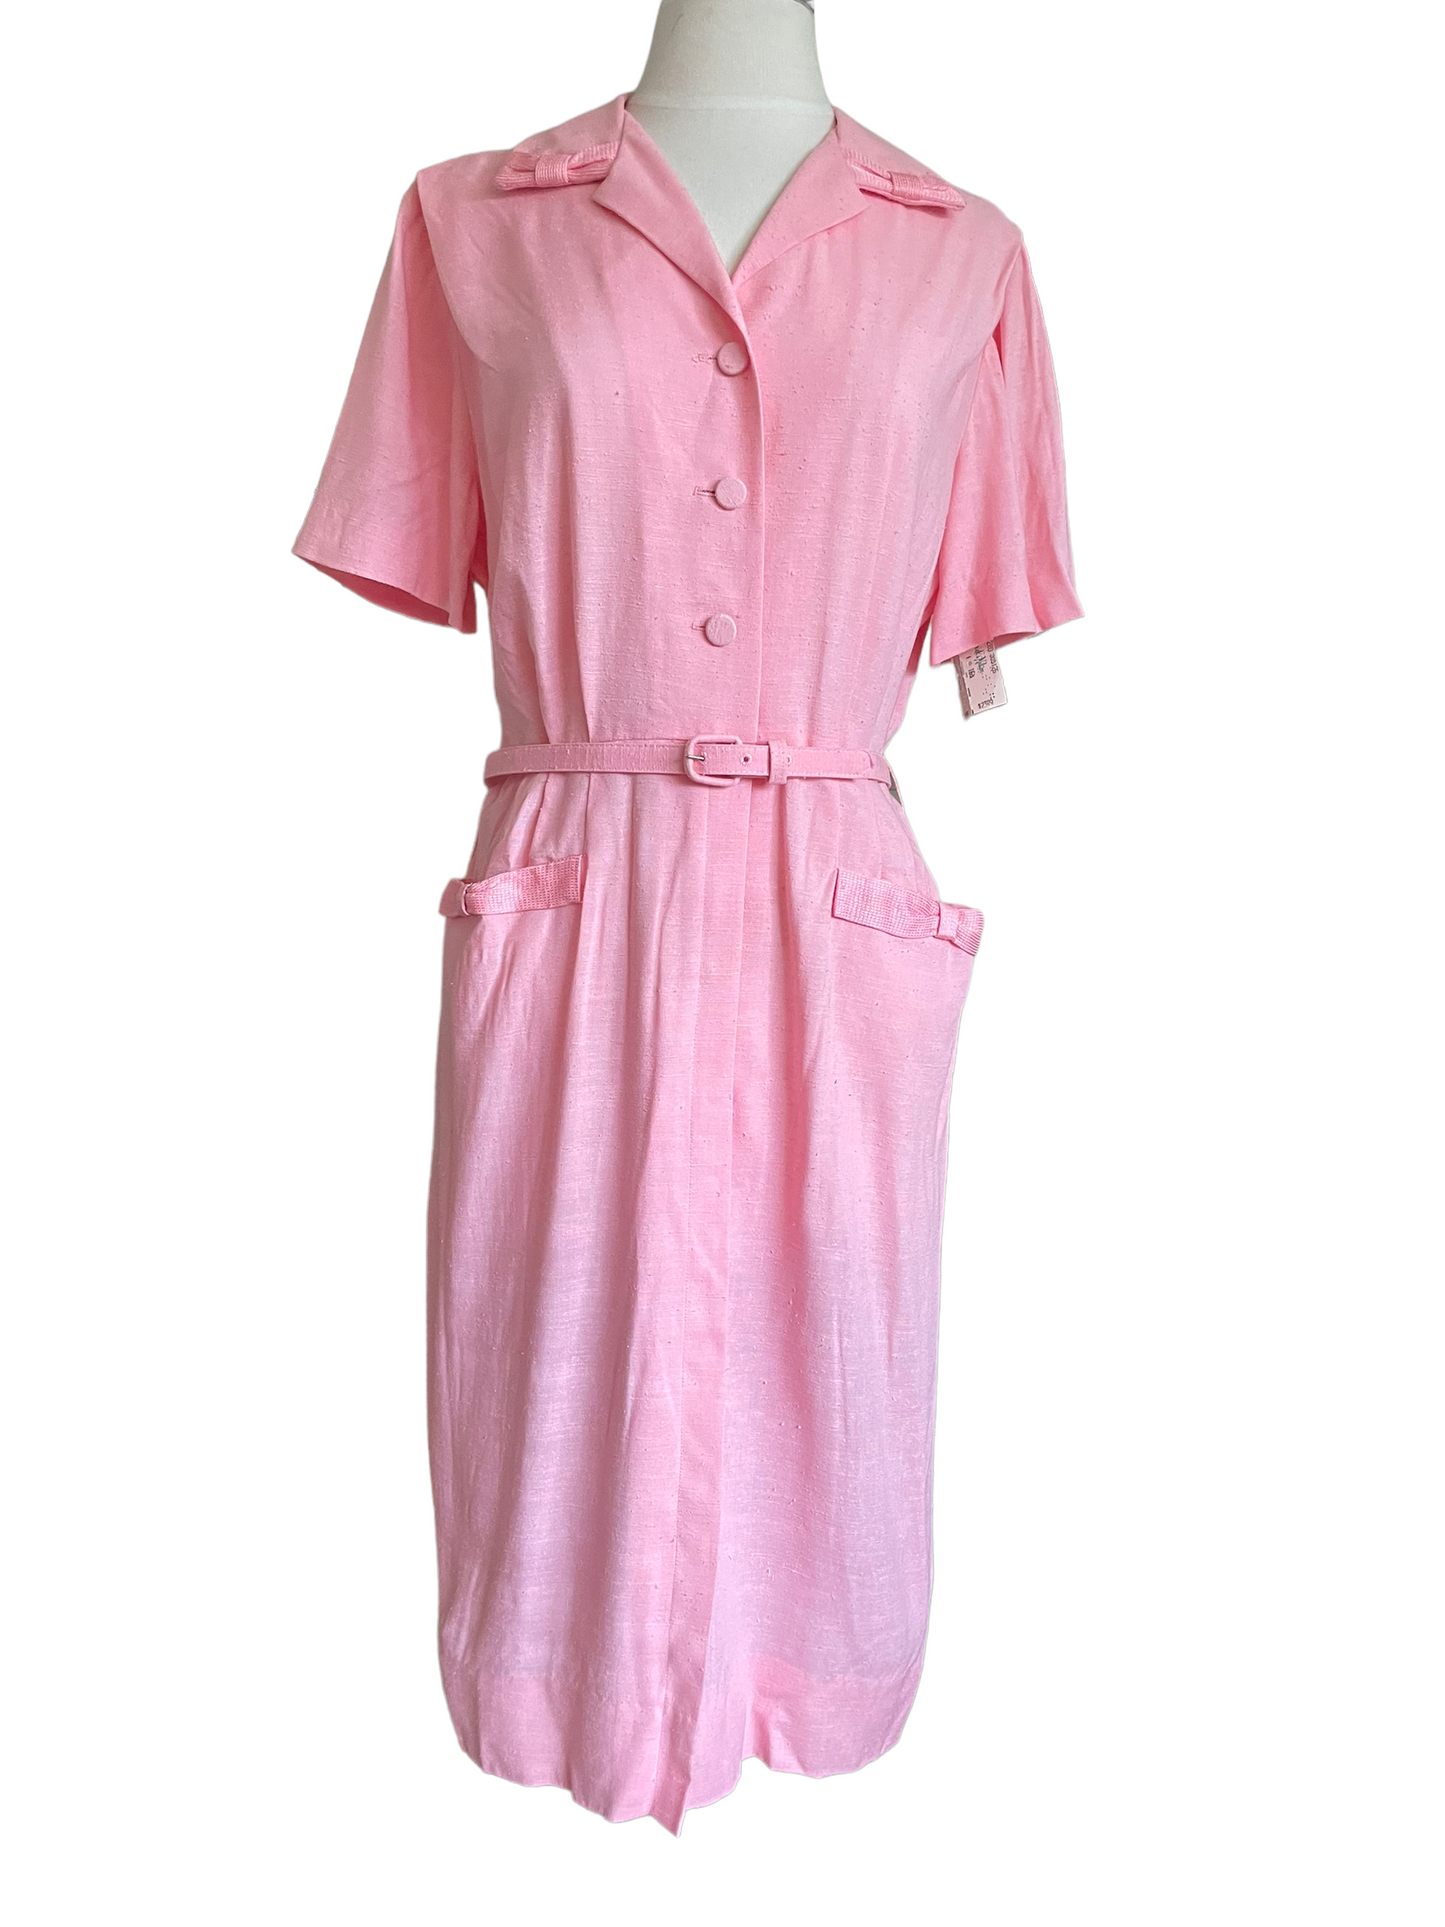 Vintage 1950s Deadstock Lordleigh Light Pink Silk and Rayon Dress SZ M |  Barn Owl Vintage | Seattle Vintage Dresses Full front view.